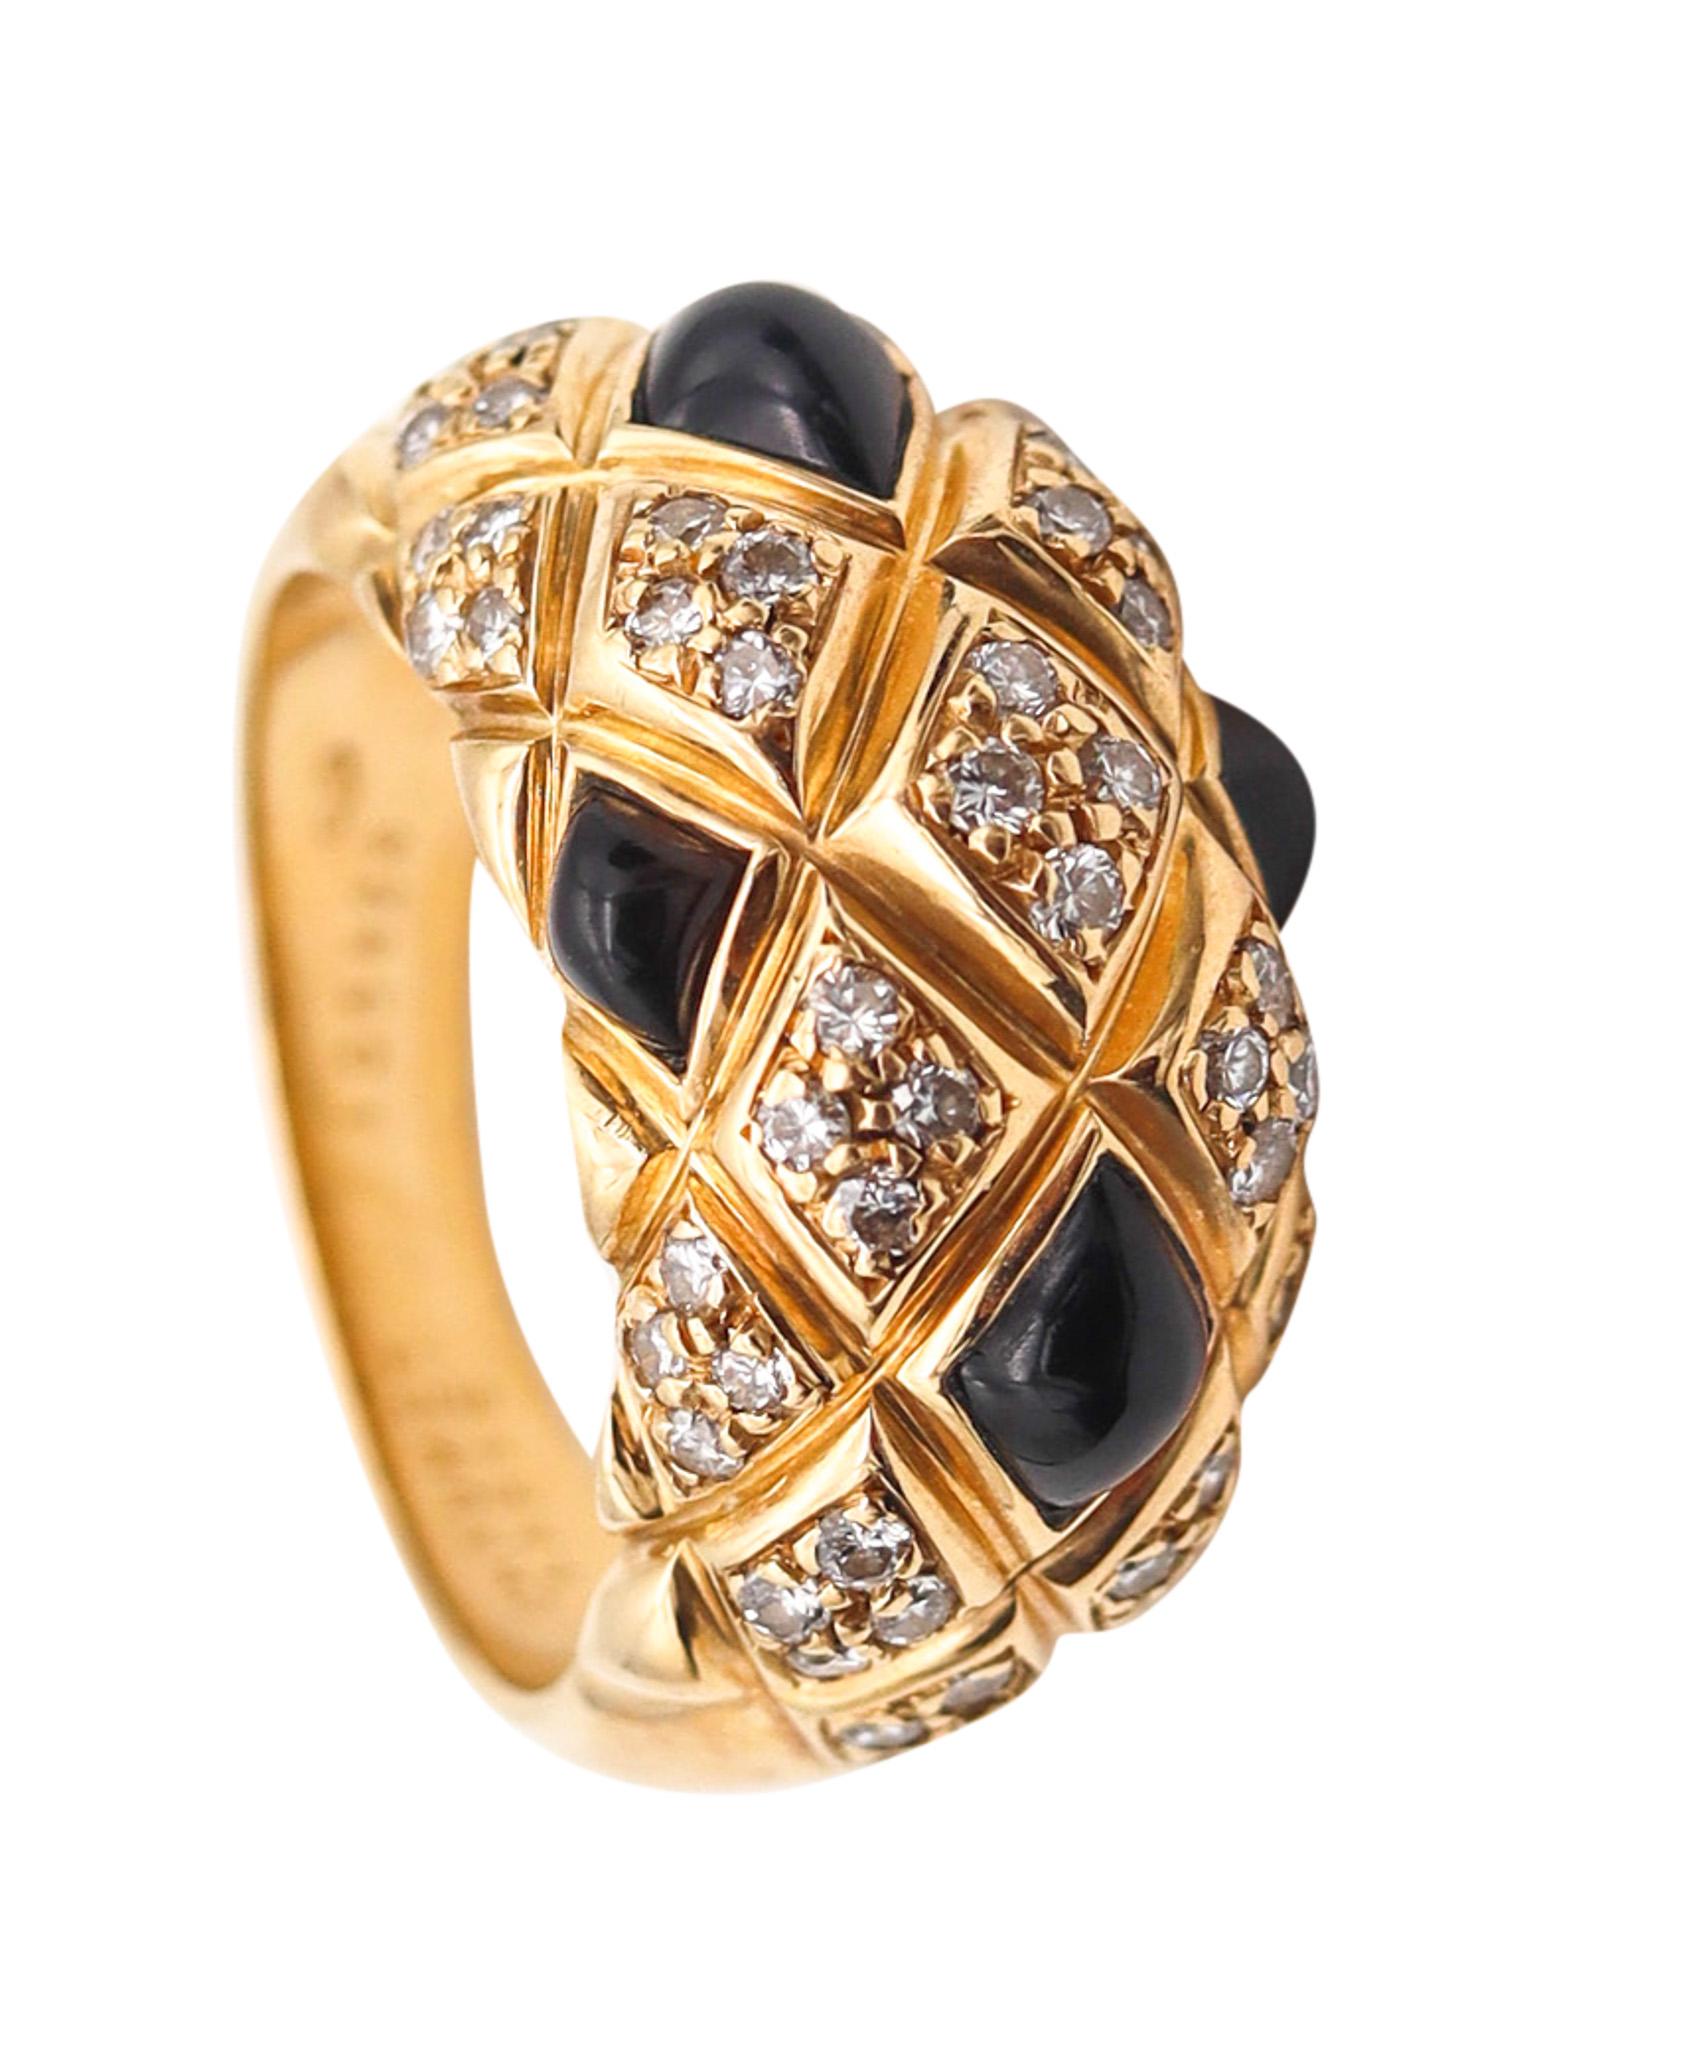 Chaumet Paris Quilted Cocktail Ring In 18Kt Gold With 1.72 Ctw Diamonds And Onyx